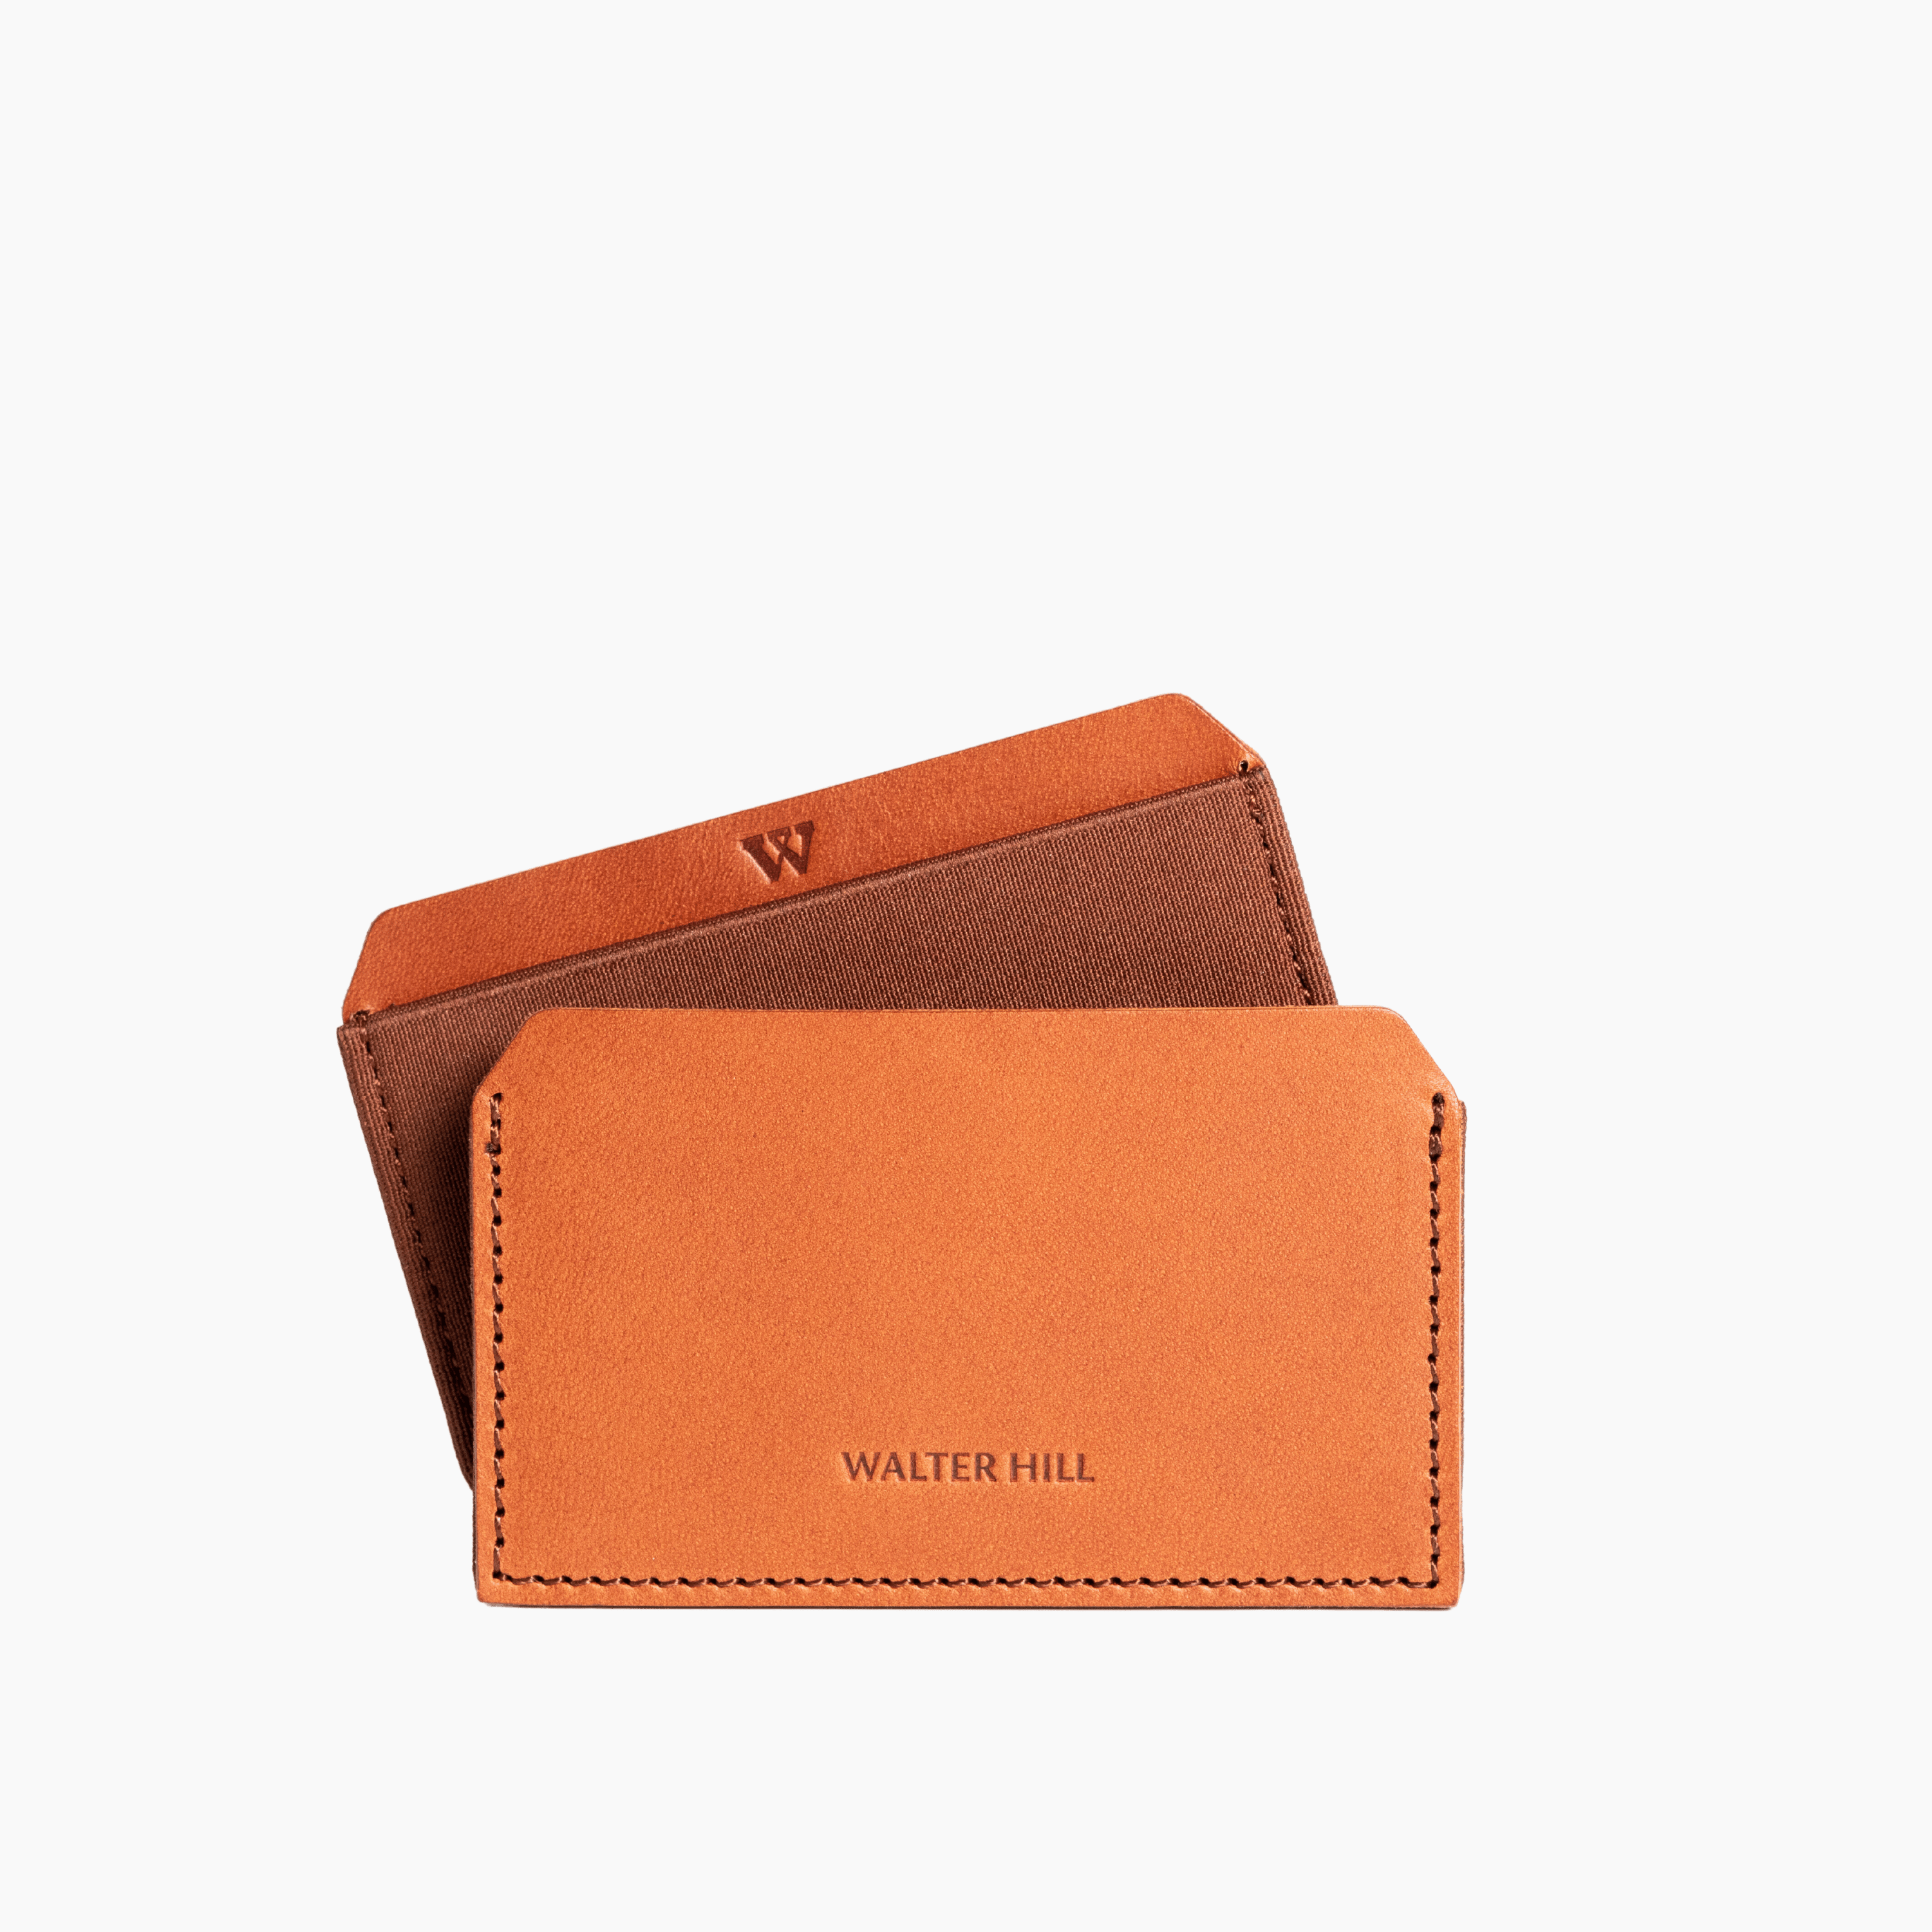 Walter Hill Wallets & Money Clips Tan / 2-8+ Cards / Italian Vegetable Tanned Leather CARD HOLDER WALLET - TAN